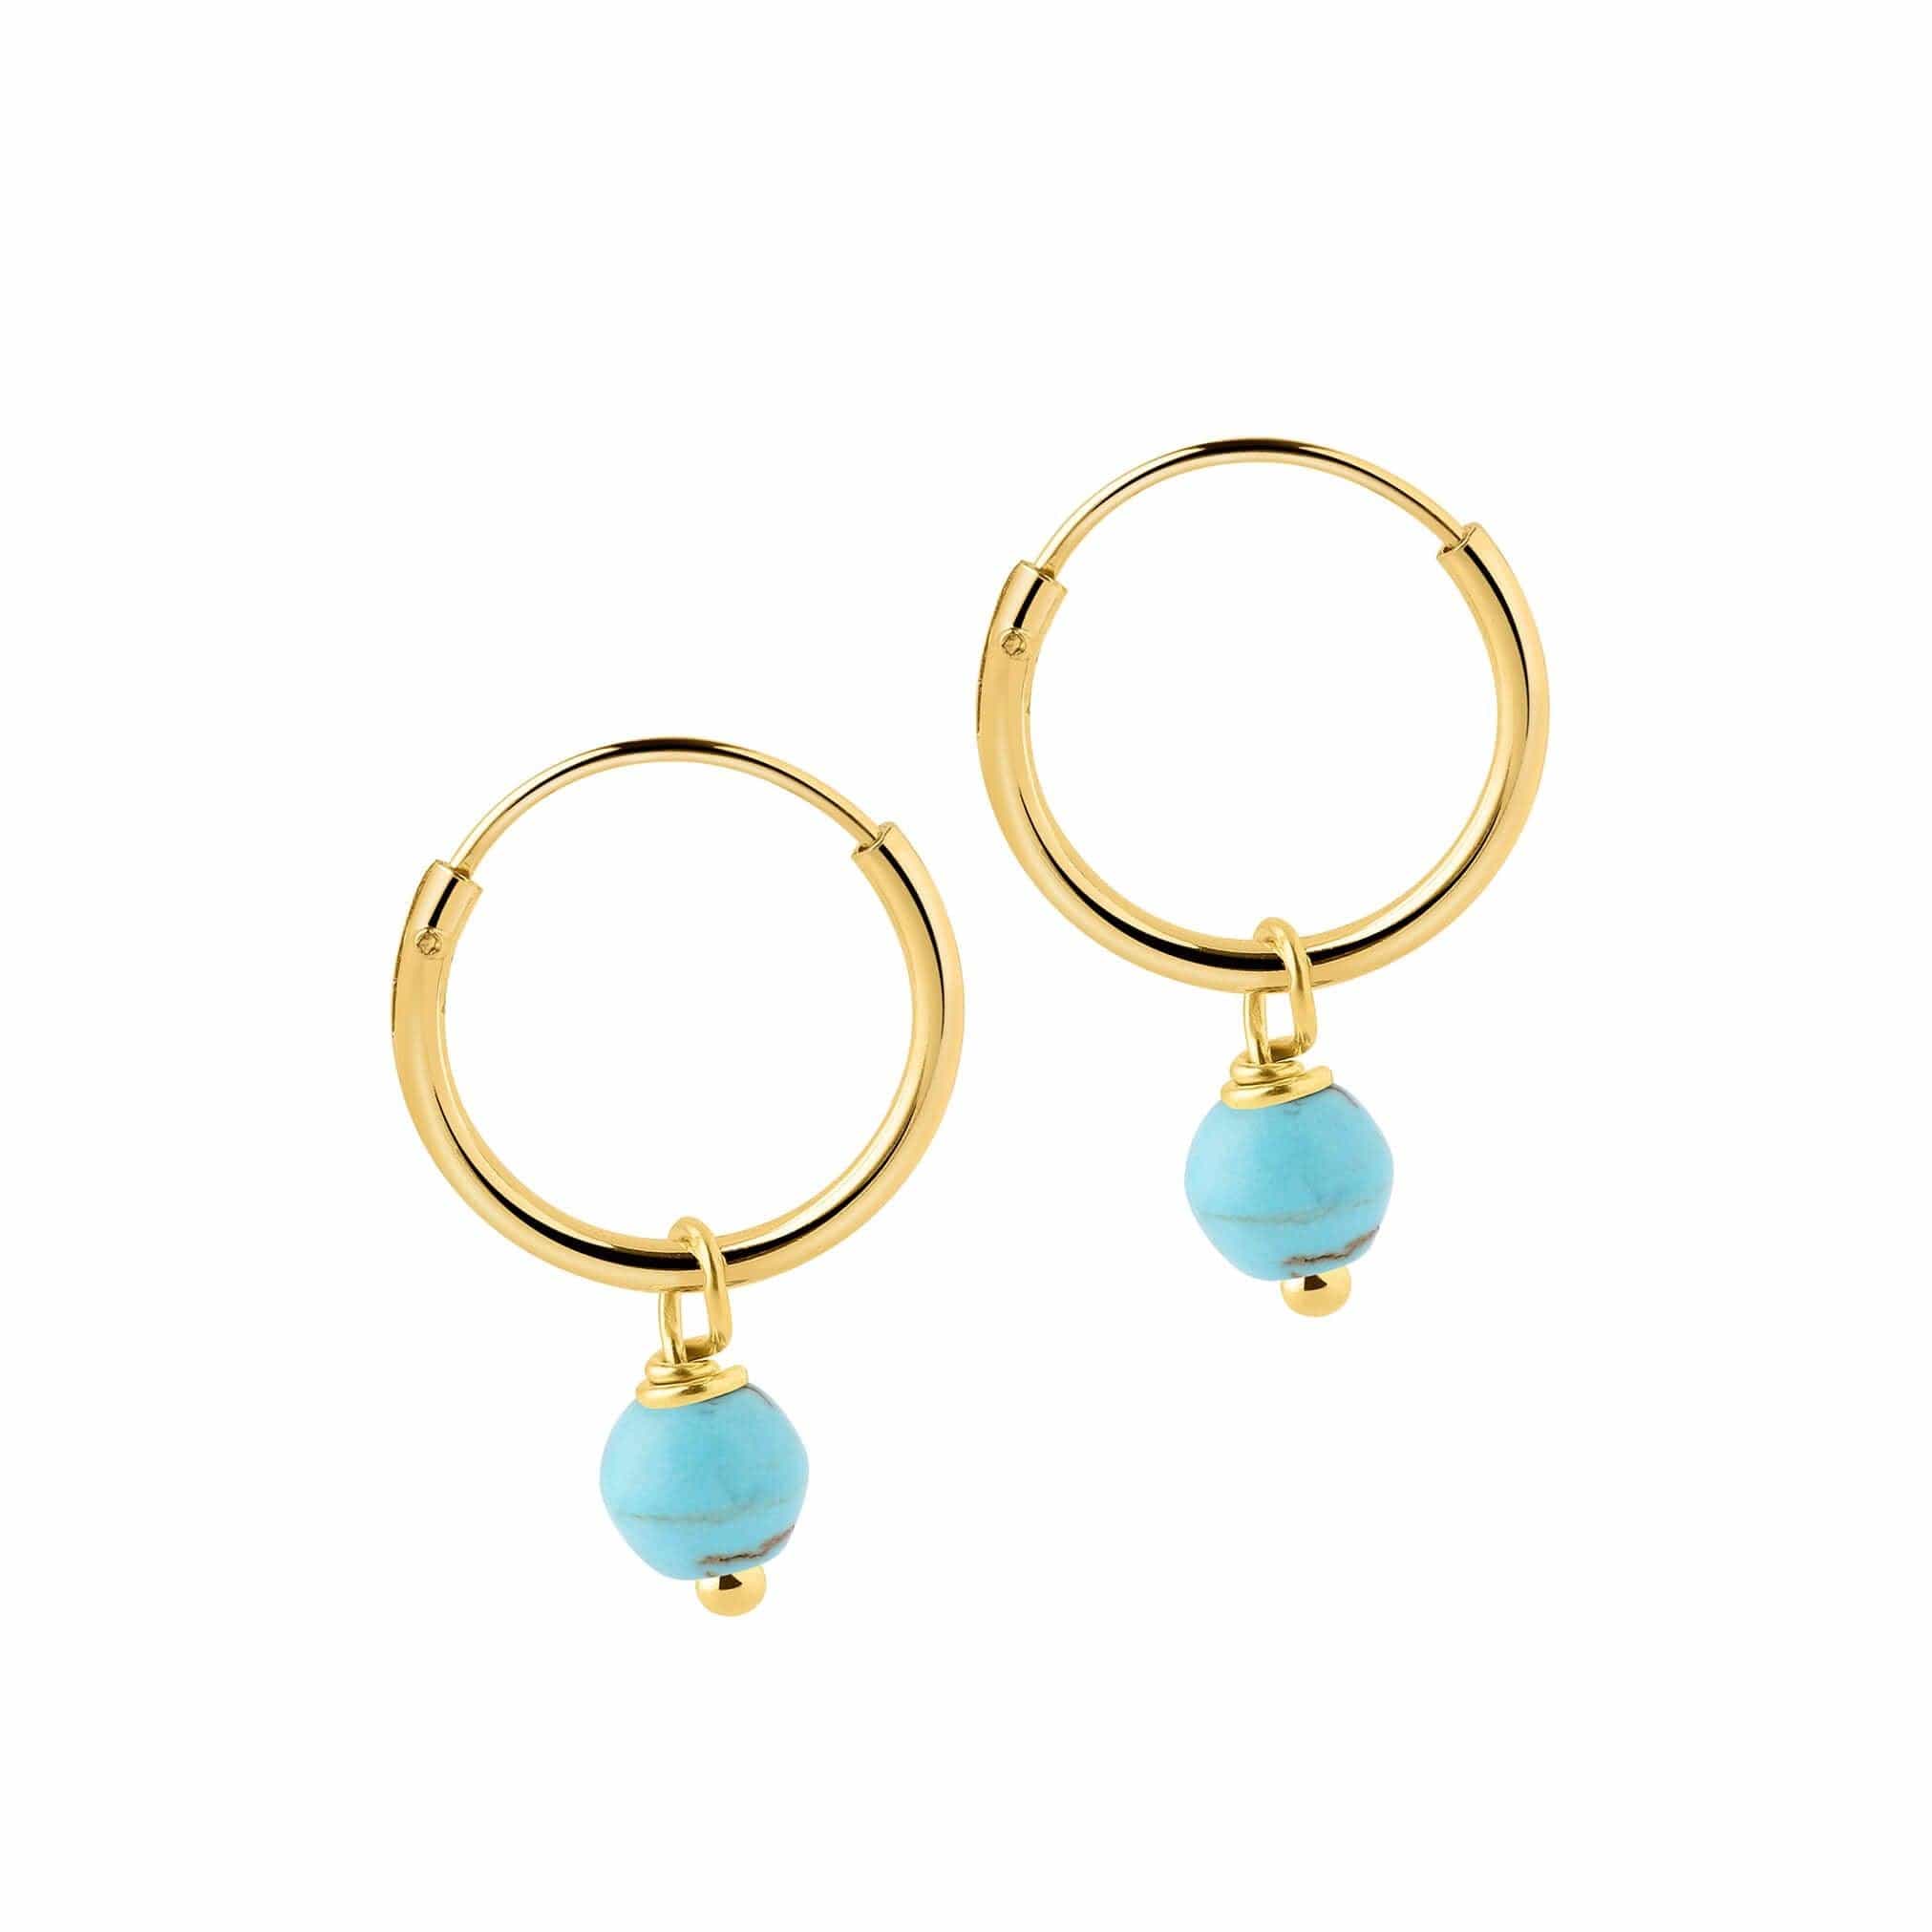 12 mm Small Gold Plated Hoop Earrings with Turquoise Blue Stone